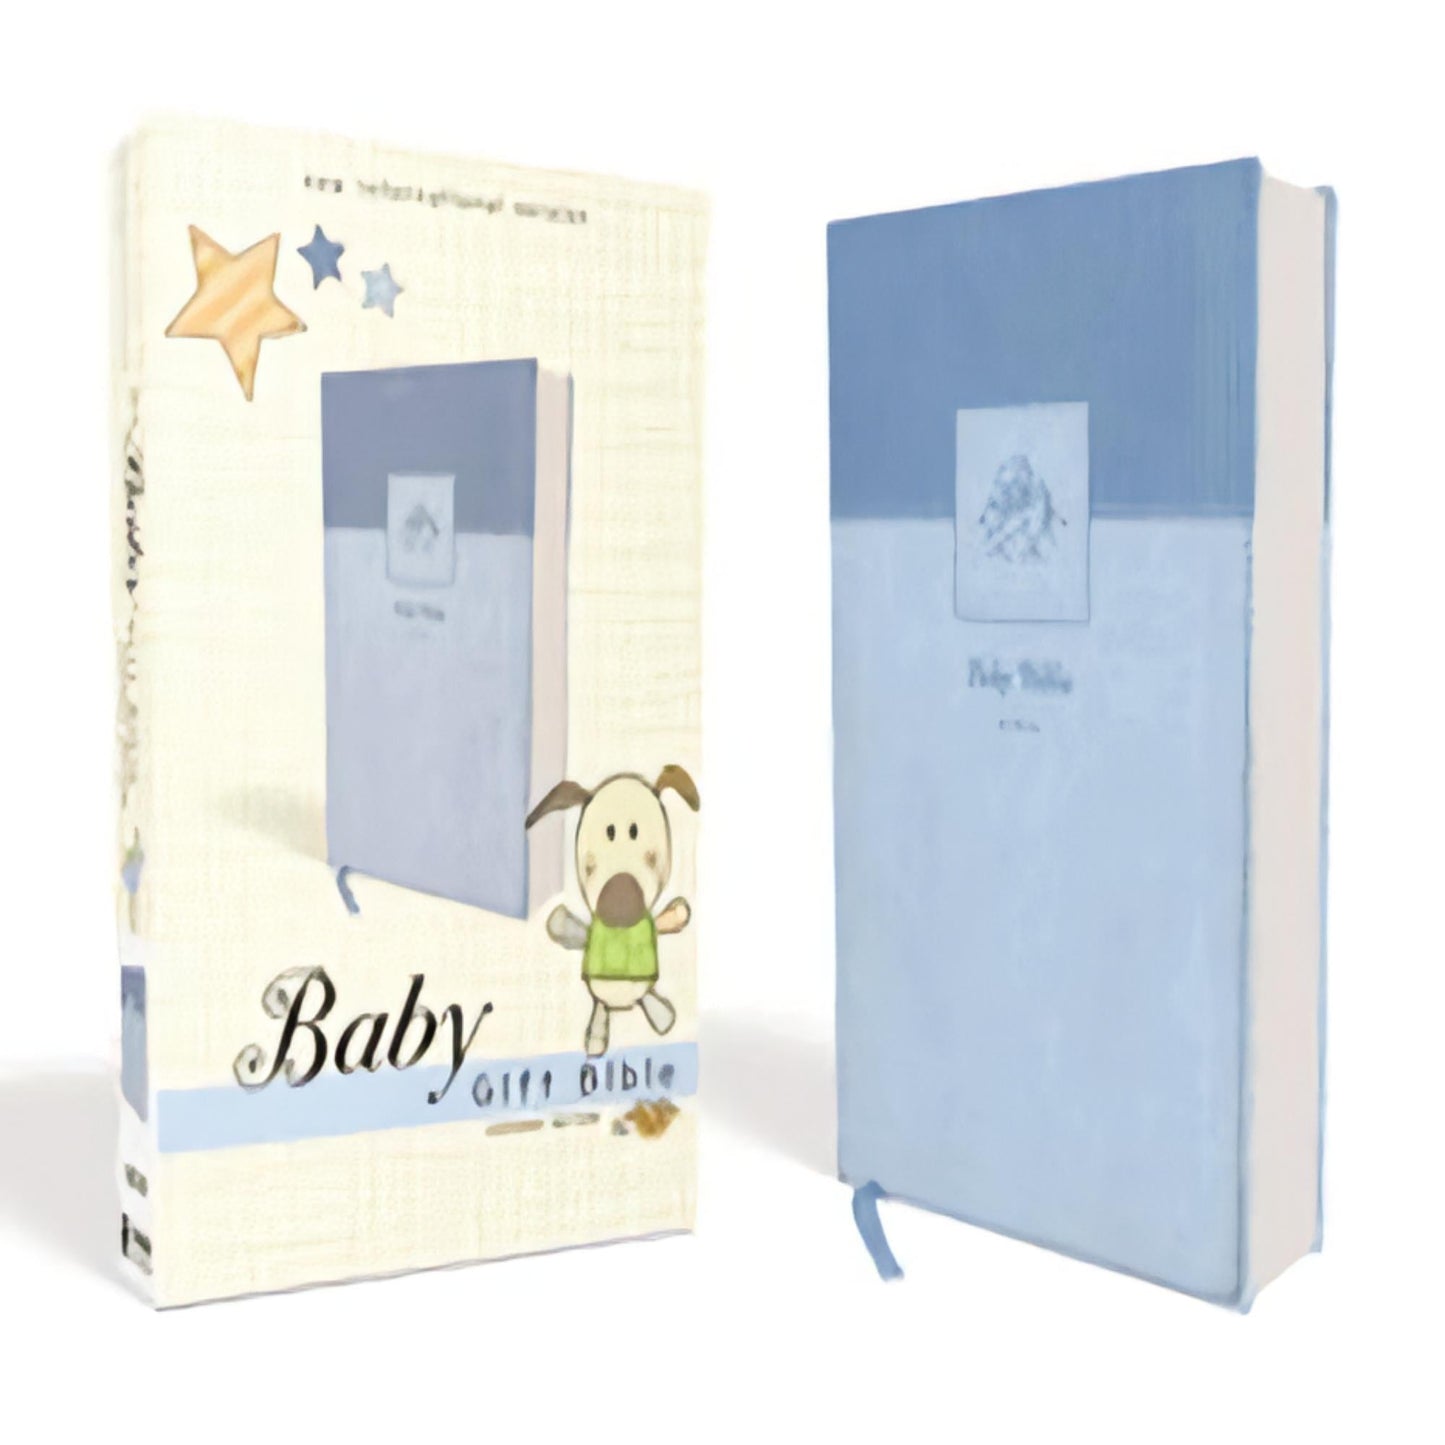 TEXTBOOK NIV, Baby Gift Bible, Holy Bible, Leathersoft, Blue, Red Letter, Comfort Print: Keepsake Edition69-021423-0310764262DPGBOOKSTORE.COM. Today's Bestsellers.